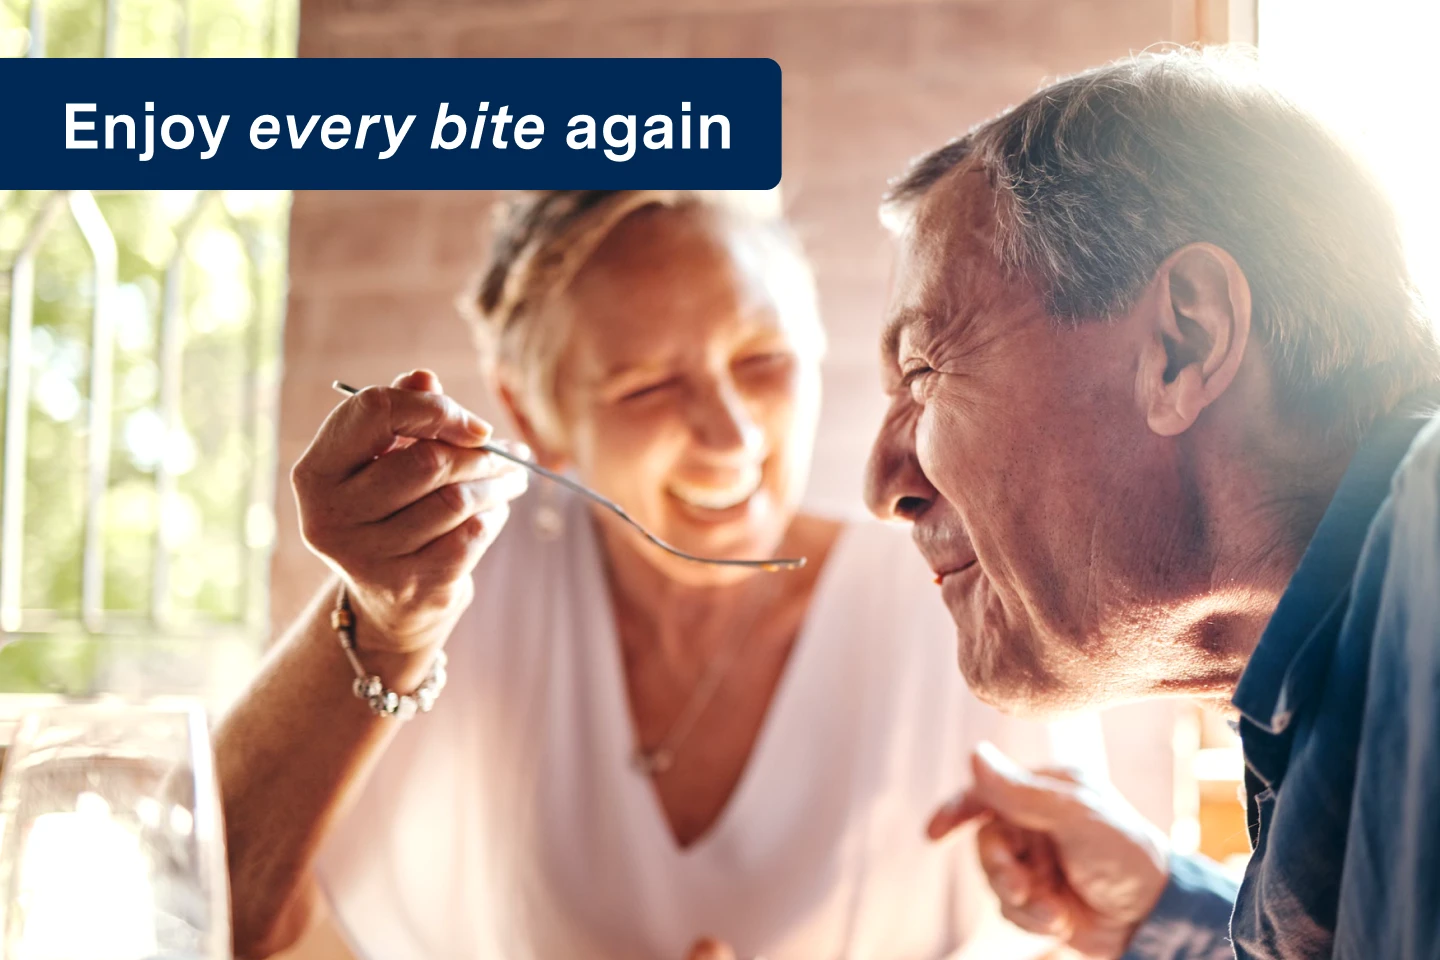 An older couple enjoying a meal together, savoring each bite, with the words "enjoy every bite again" on the image.